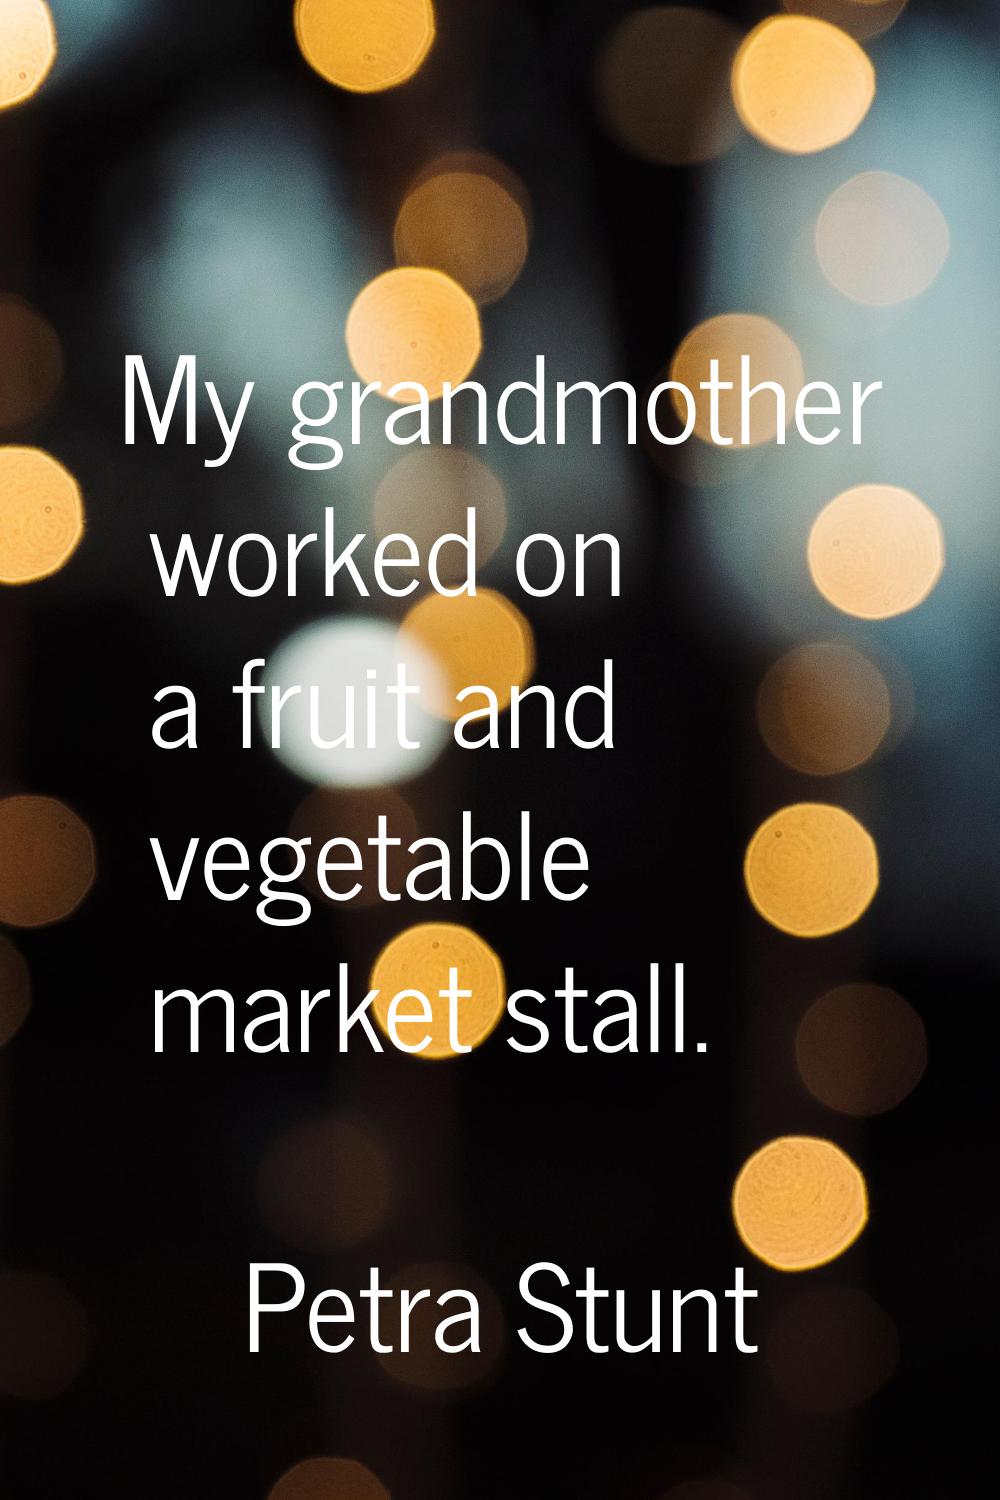 My grandmother worked on a fruit and vegetable market stall.